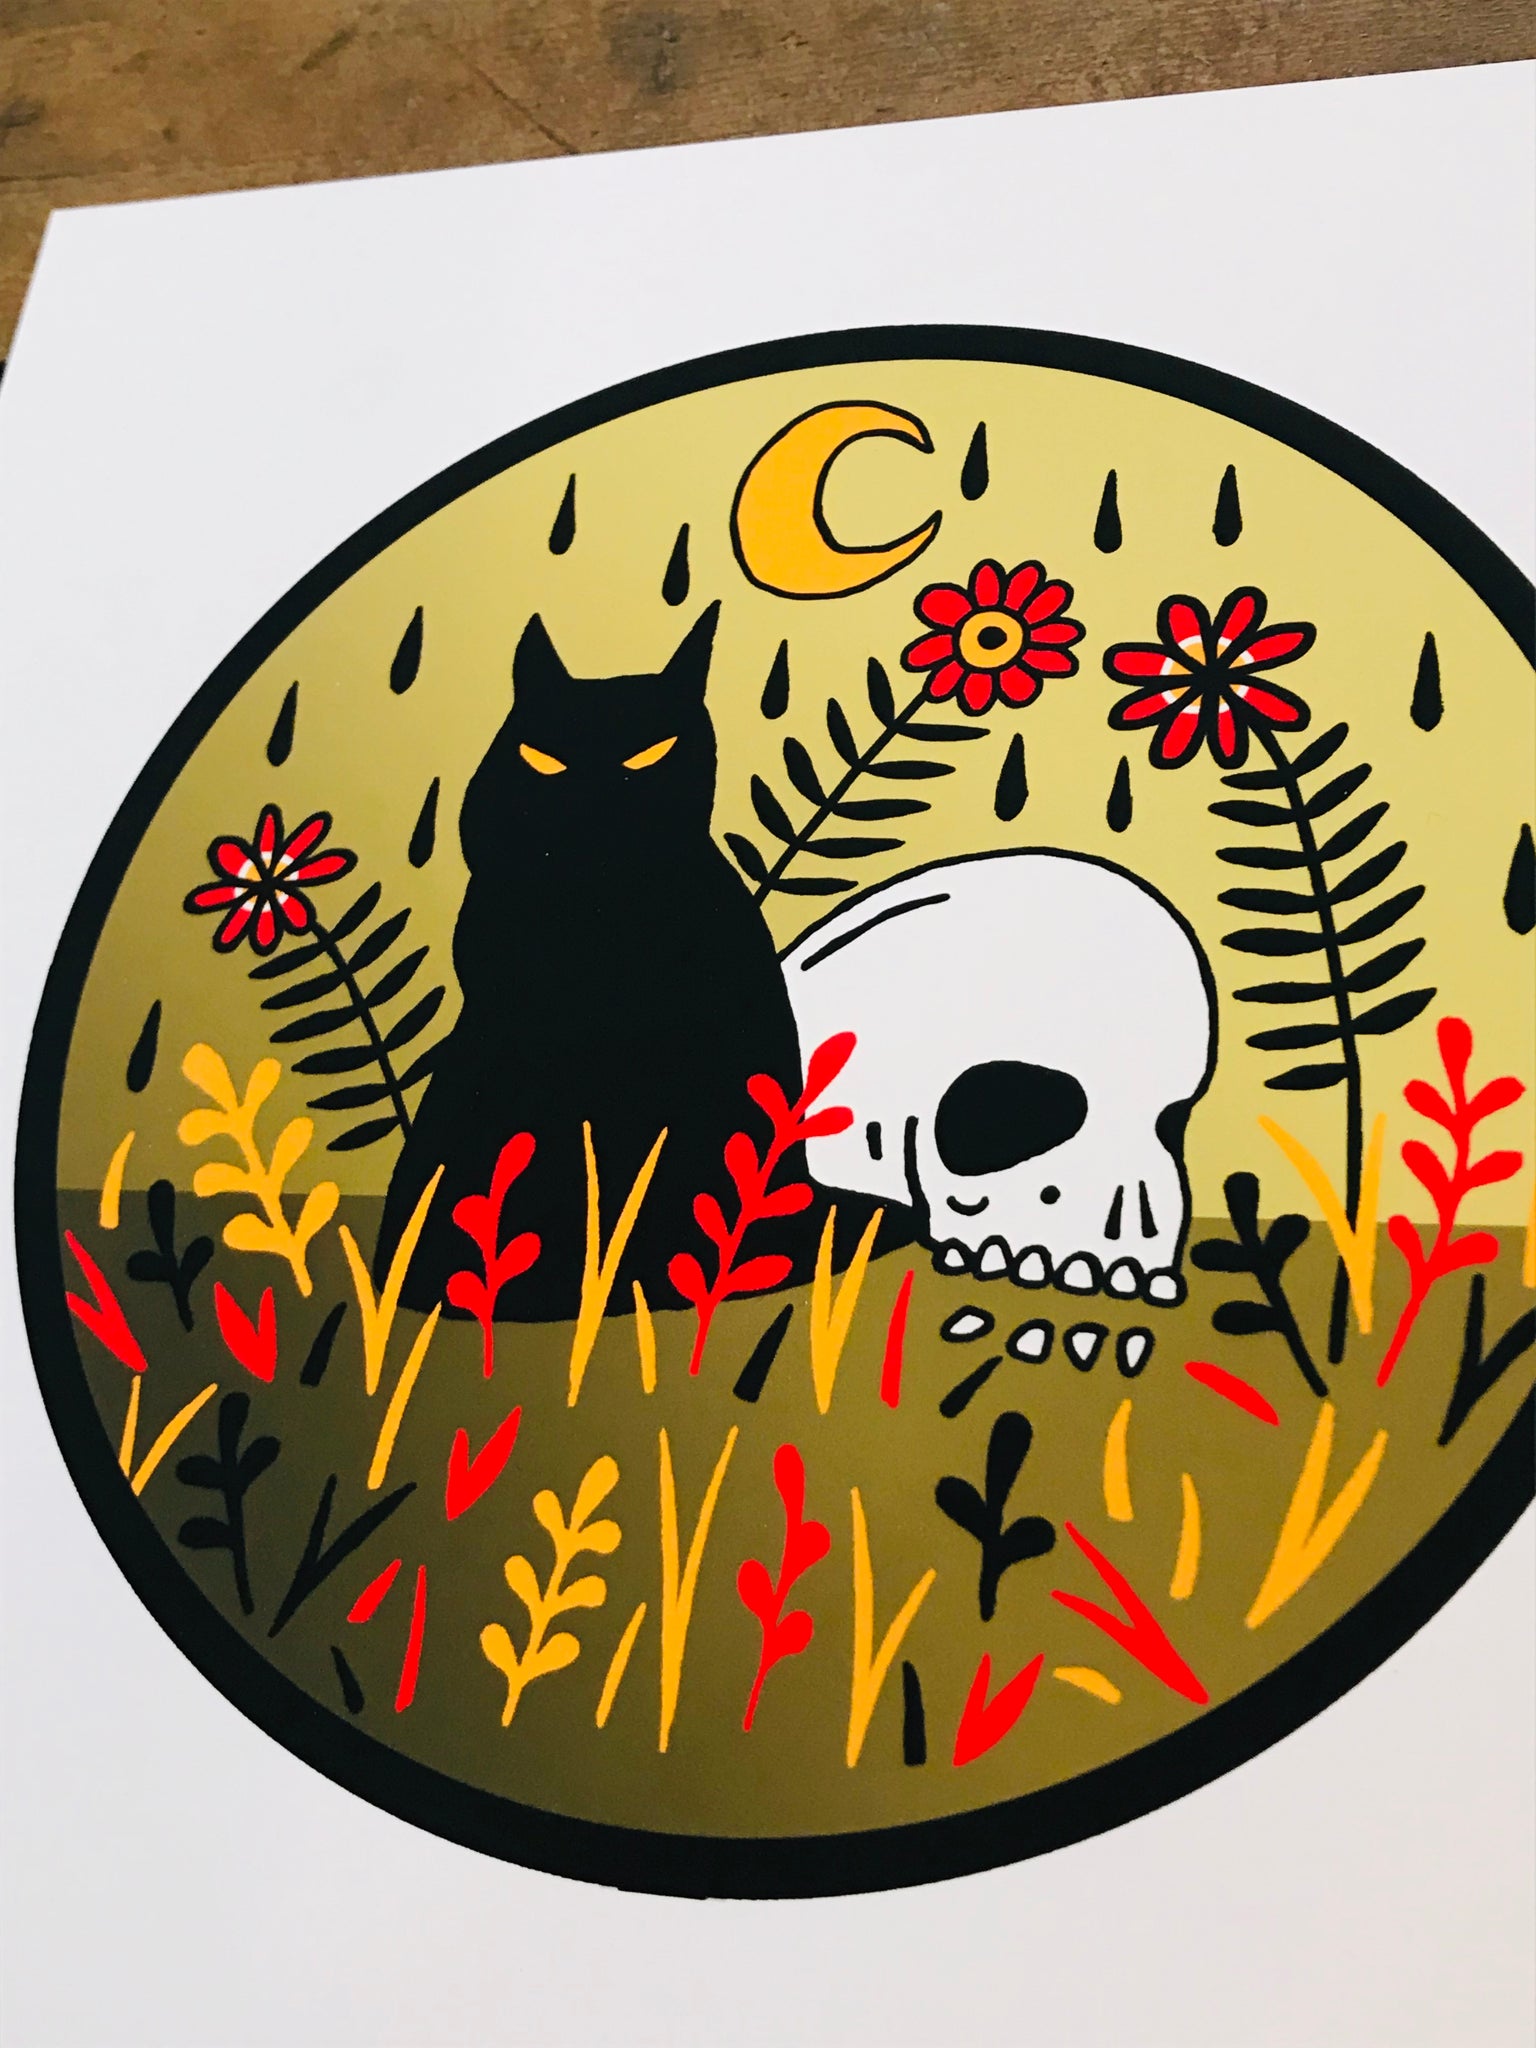 Cat and Skull 8” by 8” Giclee Print by Kris Johnsen